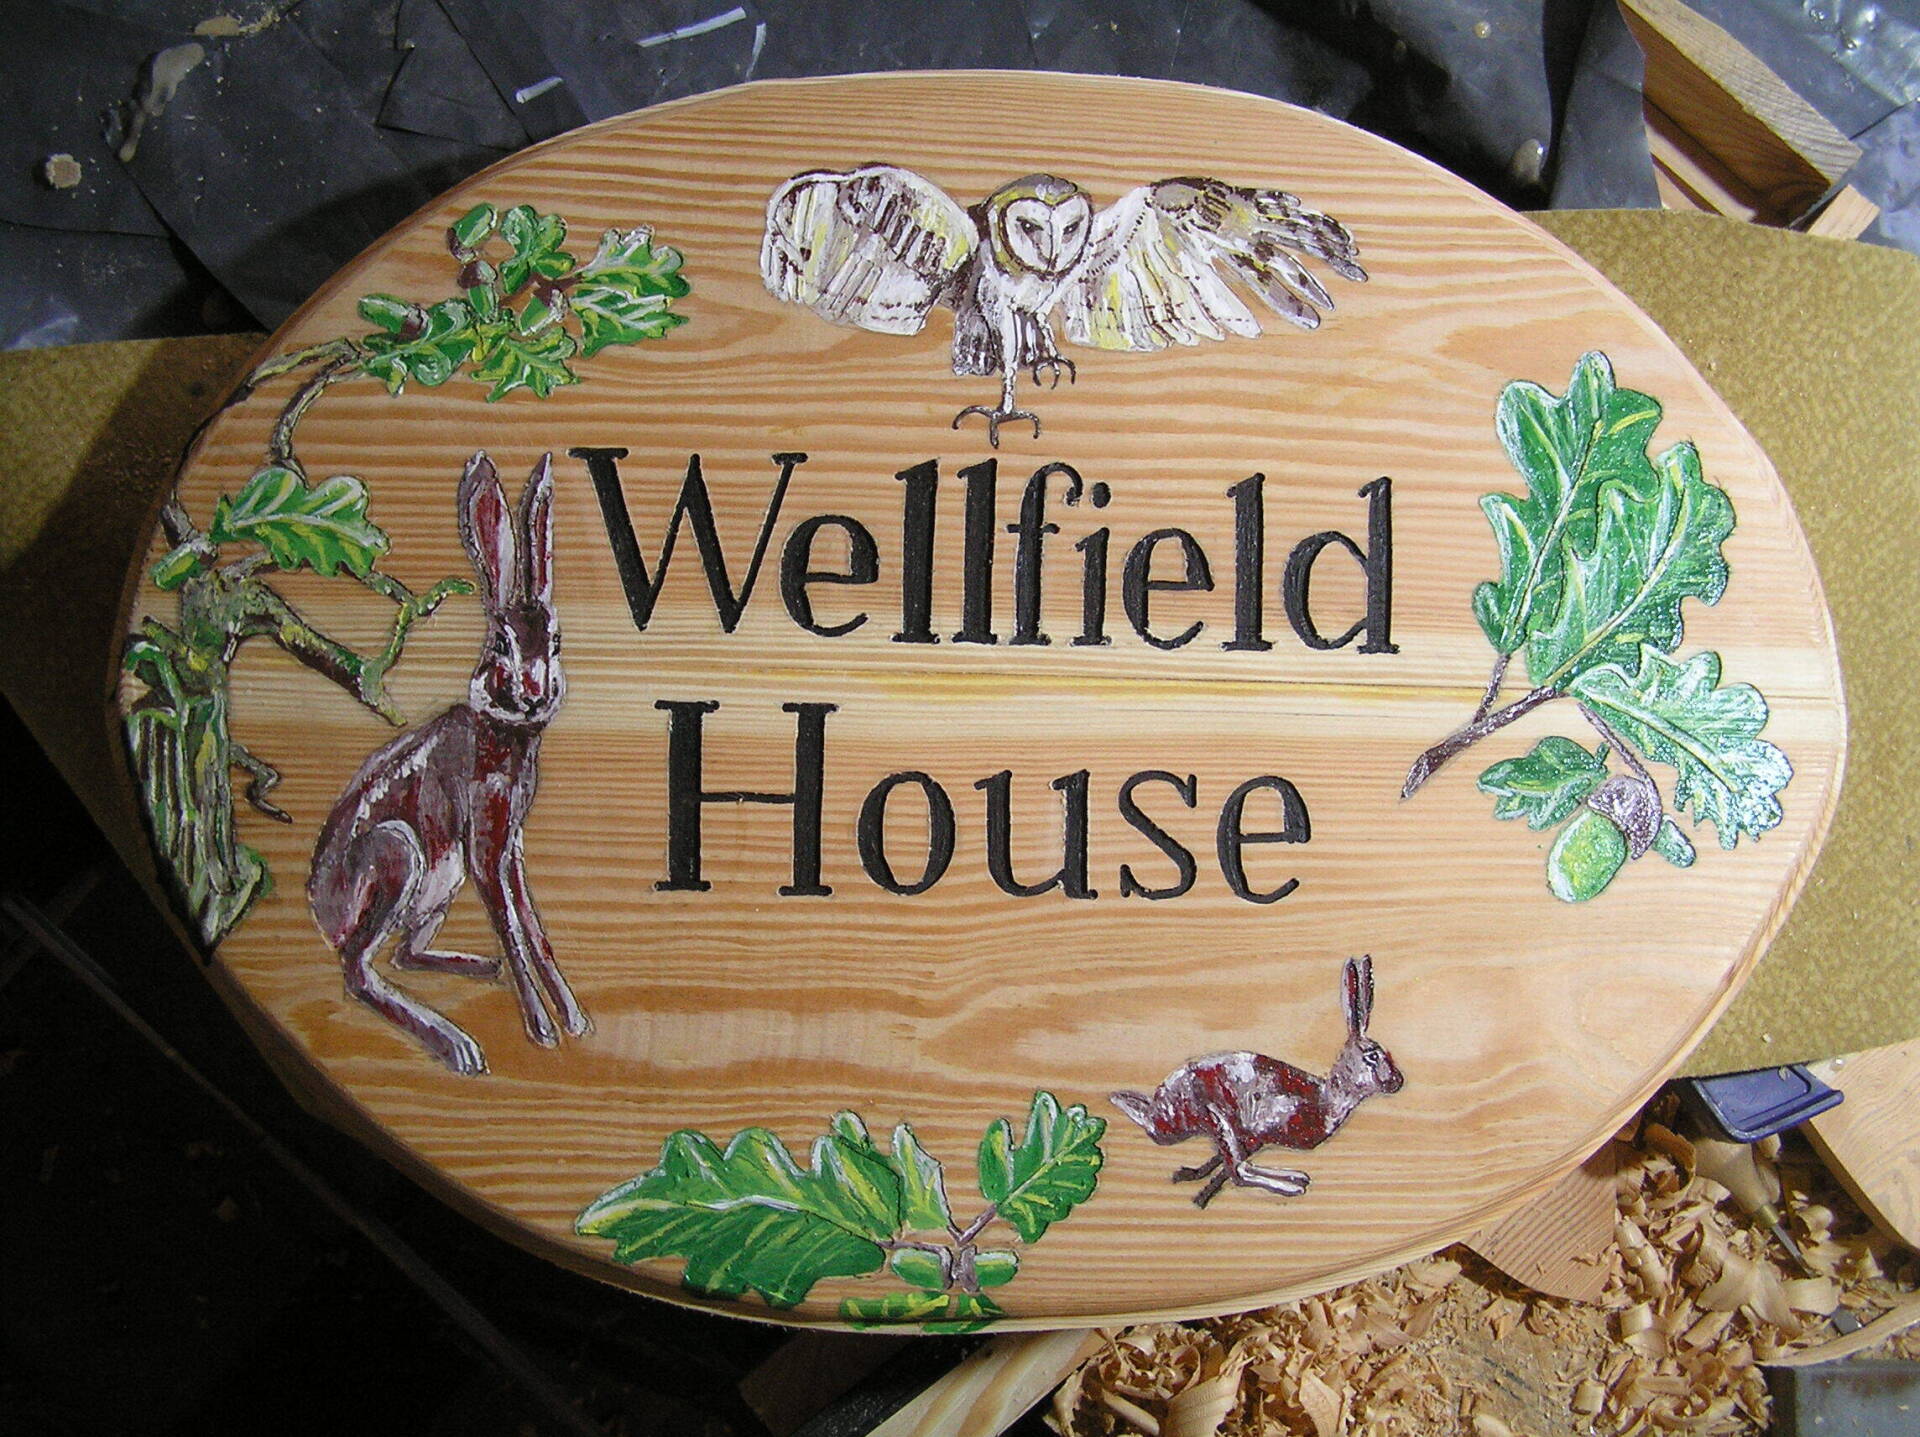 Probably the best illustrated wooden British house sign made by Ingrained Culture